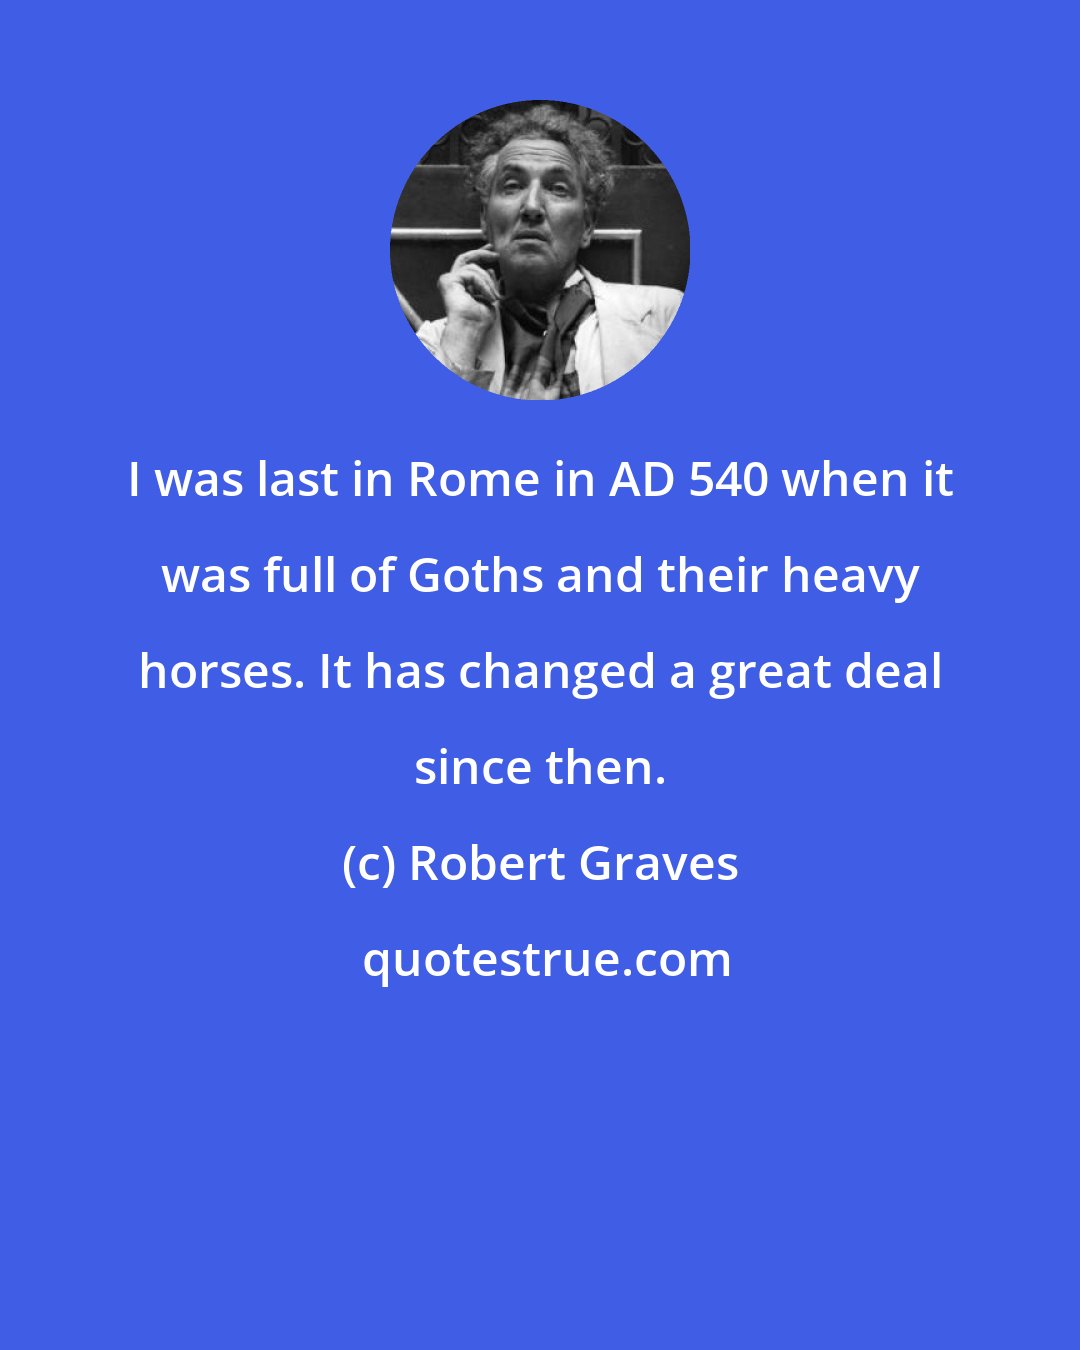 Robert Graves: I was last in Rome in AD 540 when it was full of Goths and their heavy horses. It has changed a great deal since then.